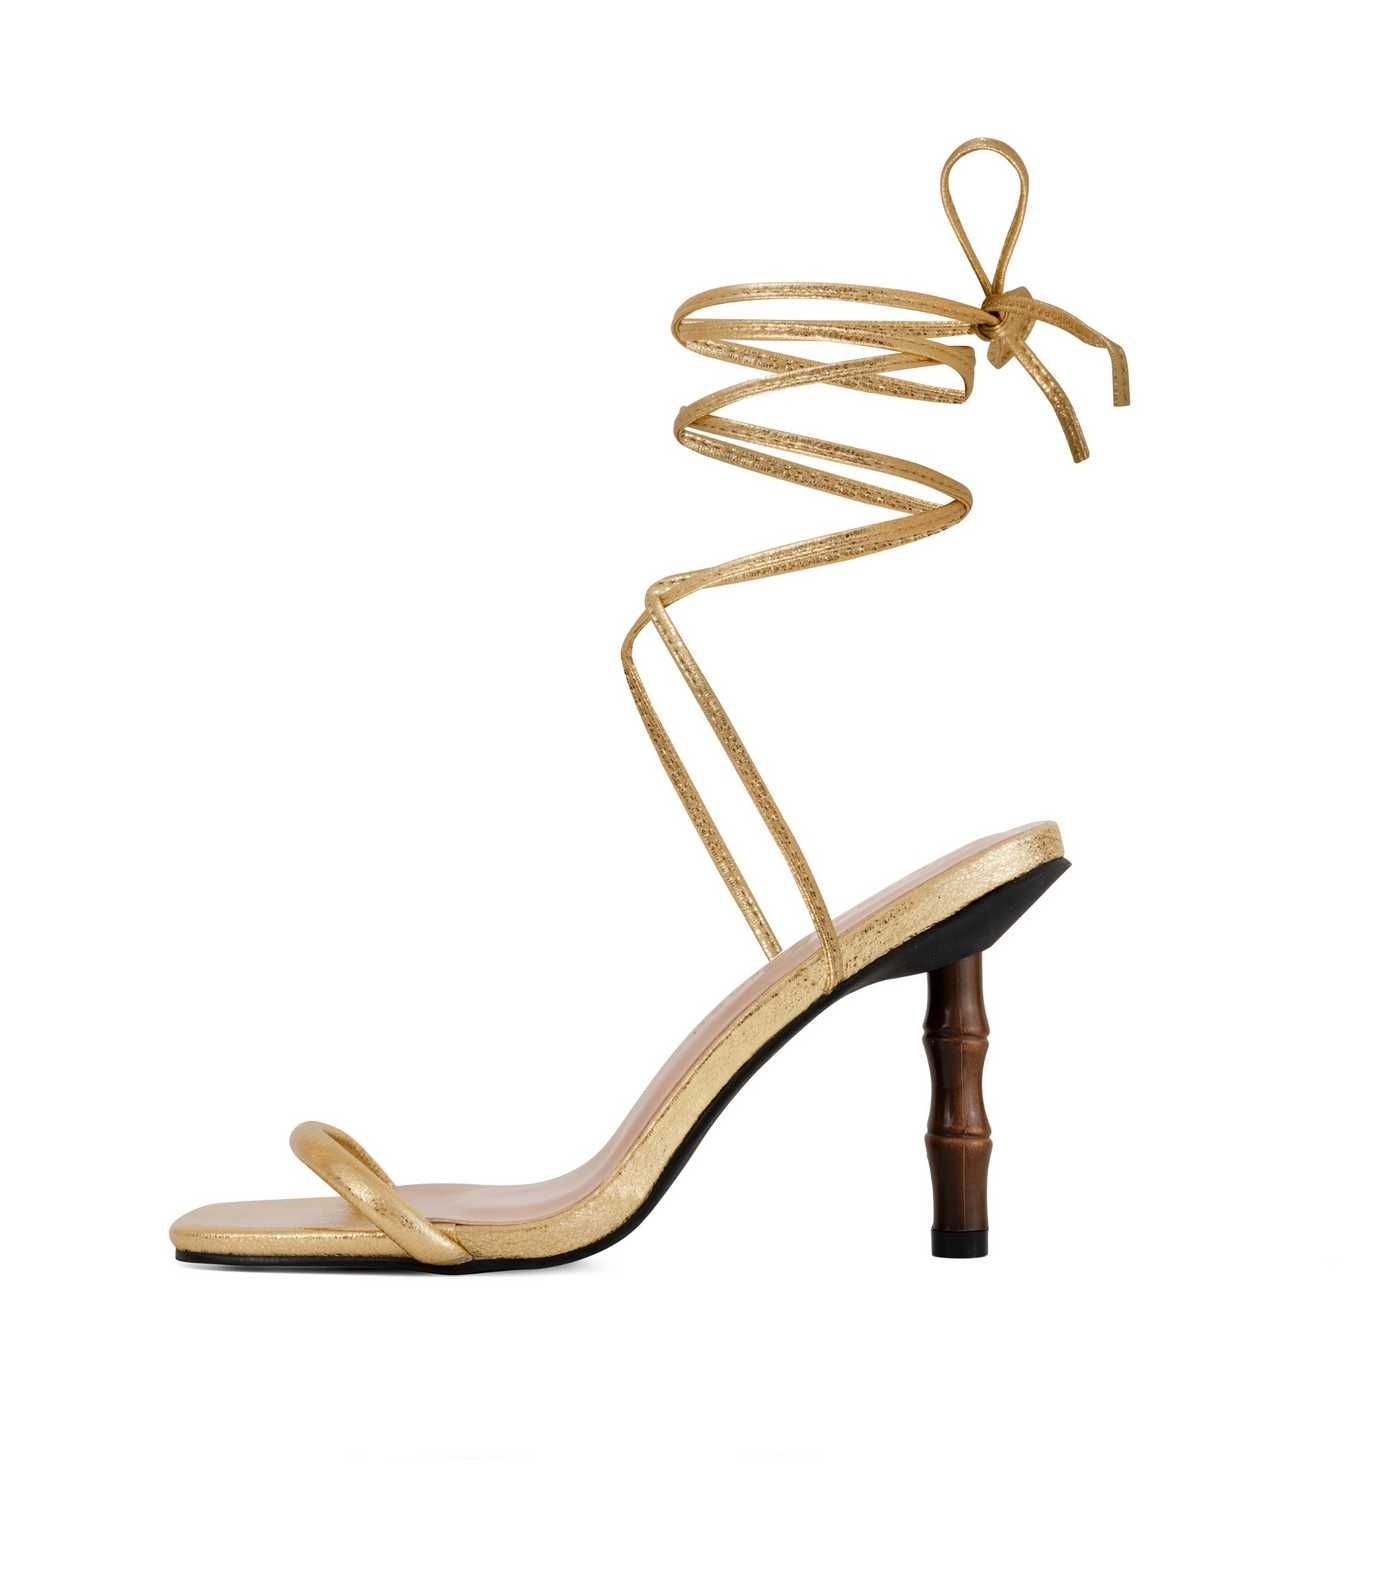 South Beach Gold Tie Faux Bamboo Heel Sandals
						
						Add to Saved Items
						Remove from S... | New Look (UK)